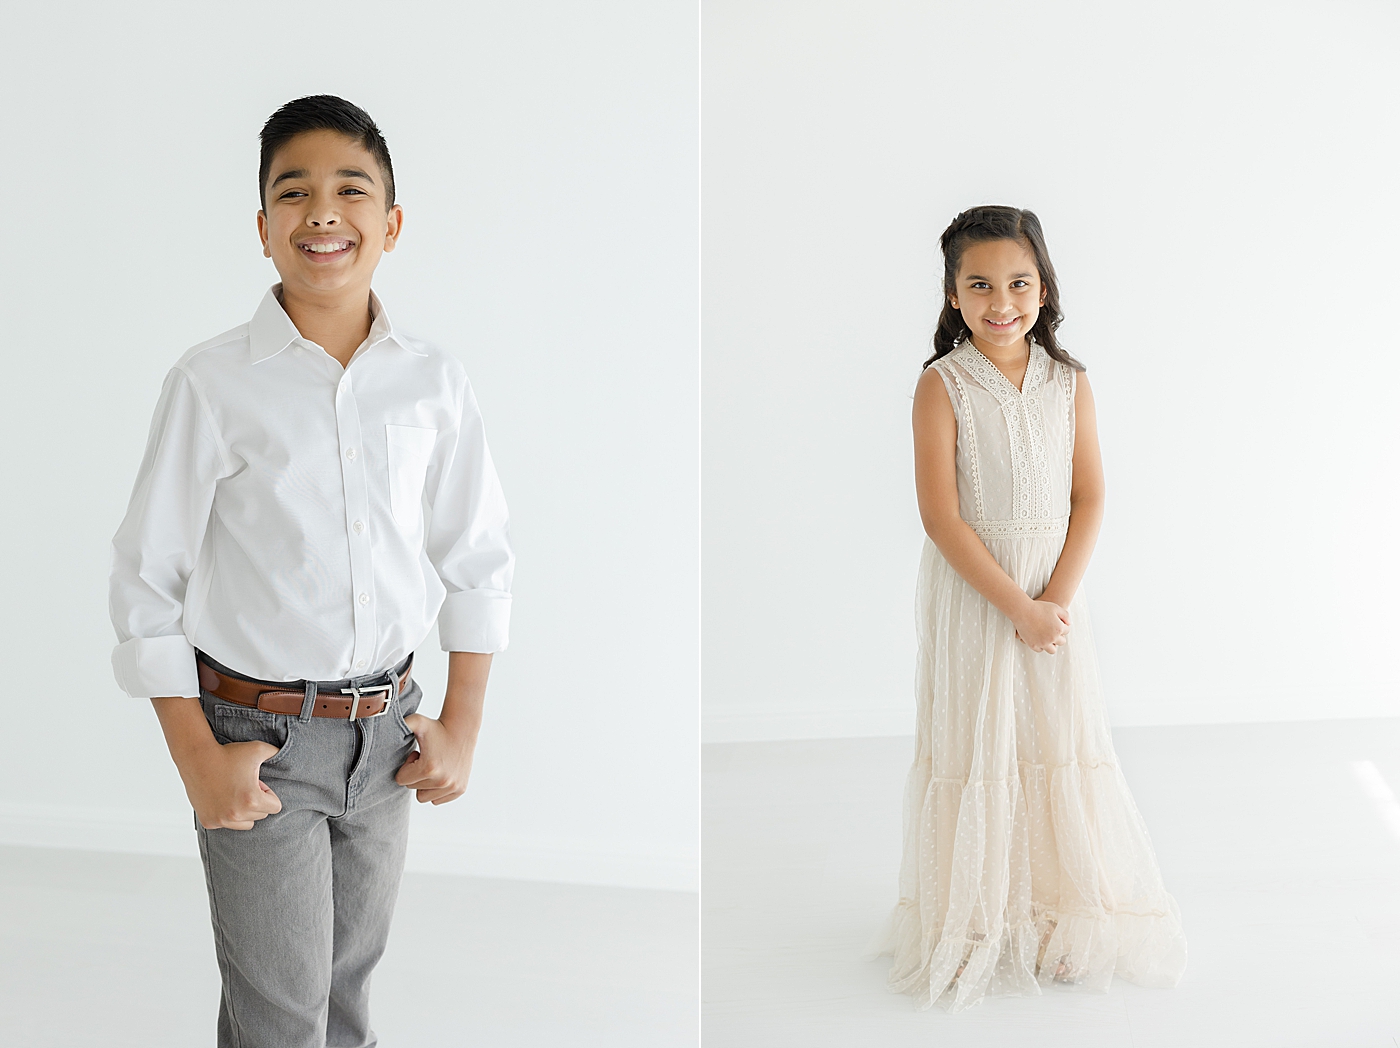 Portraits of little boy and little girl | Image by Sana Ahmed Photography